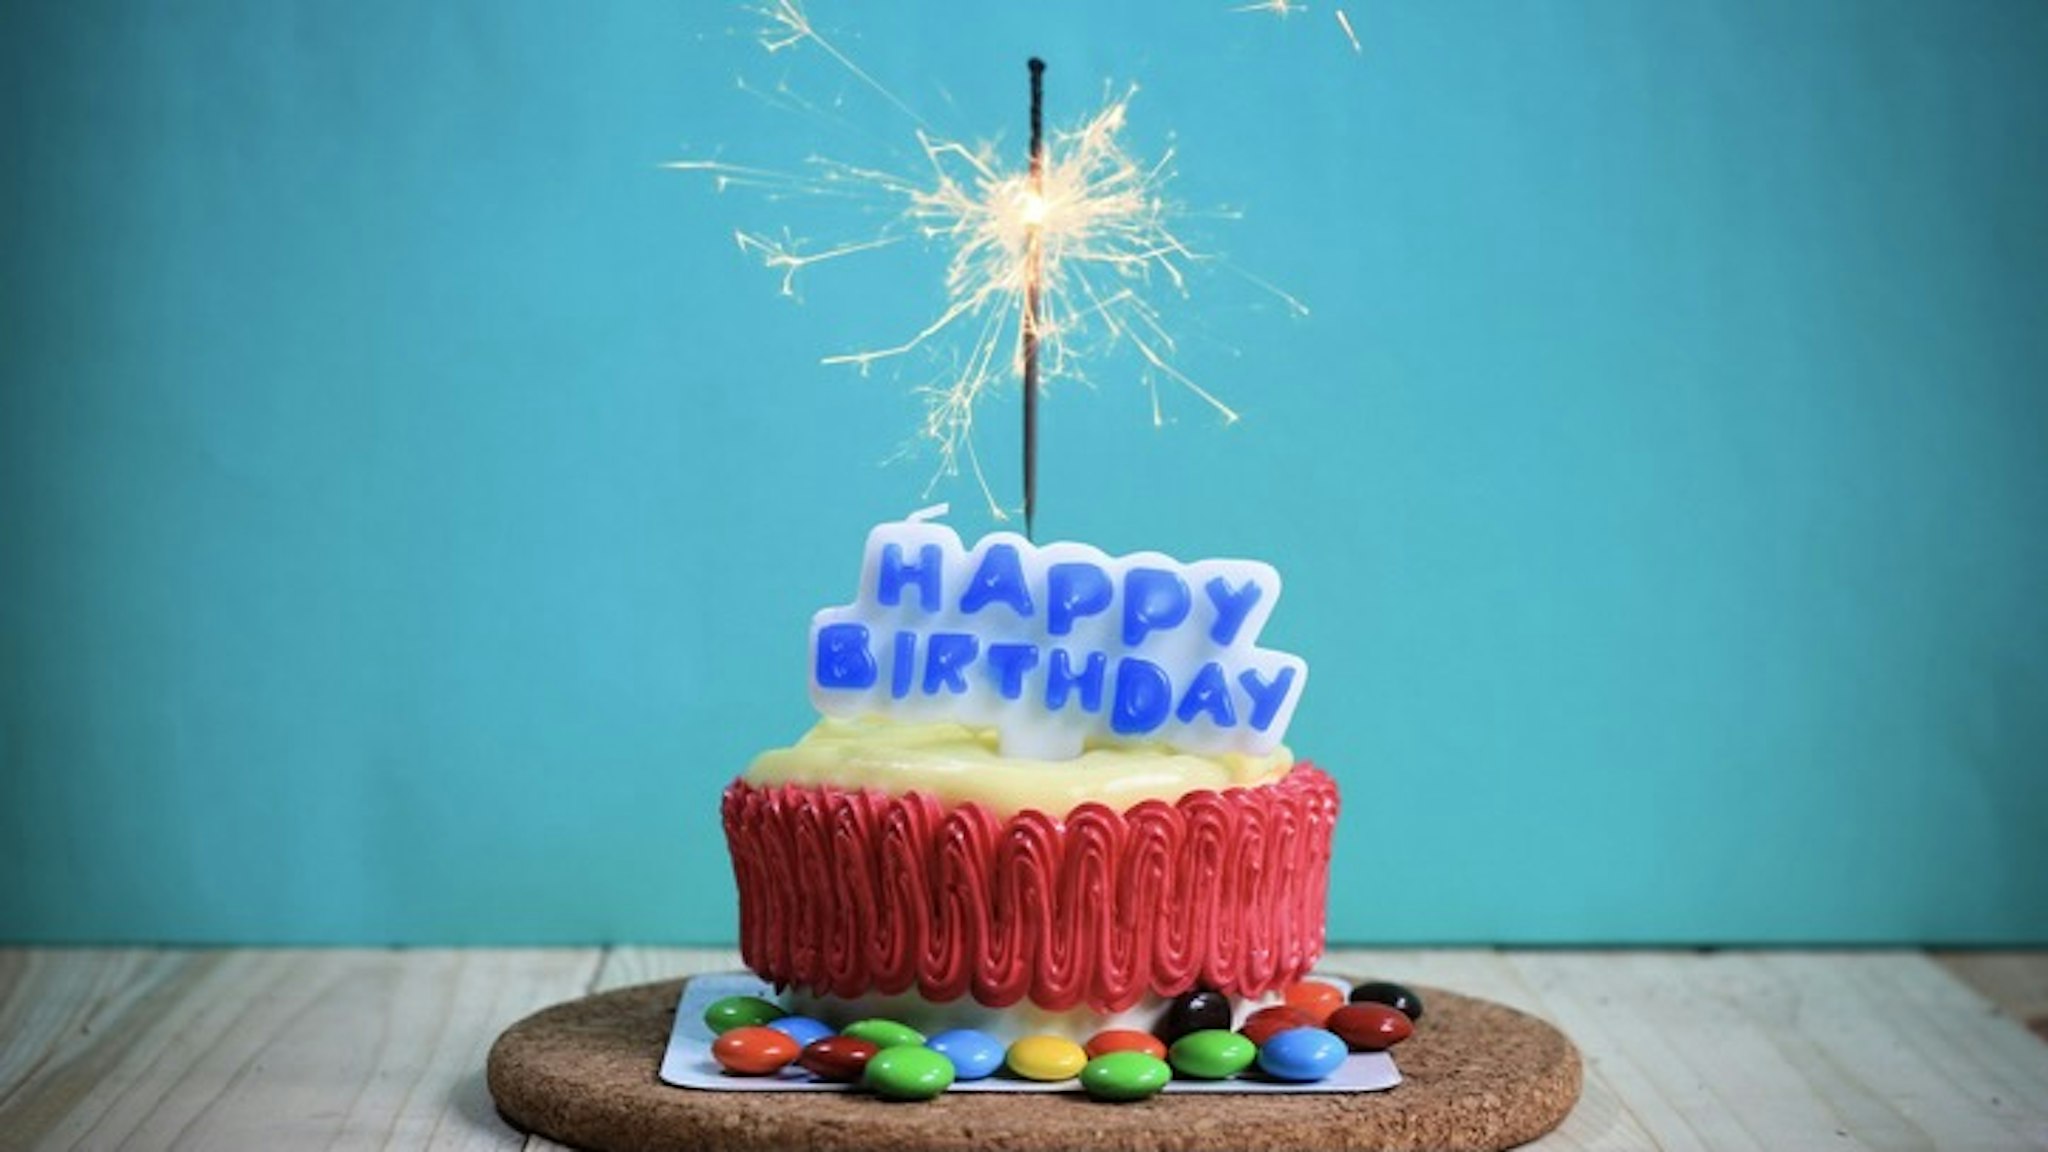 Close-Up Of Birthday Cake On Table Against Turquoise Wall - stock photo Porapak Apichodilok / EyeEm via Getty Images